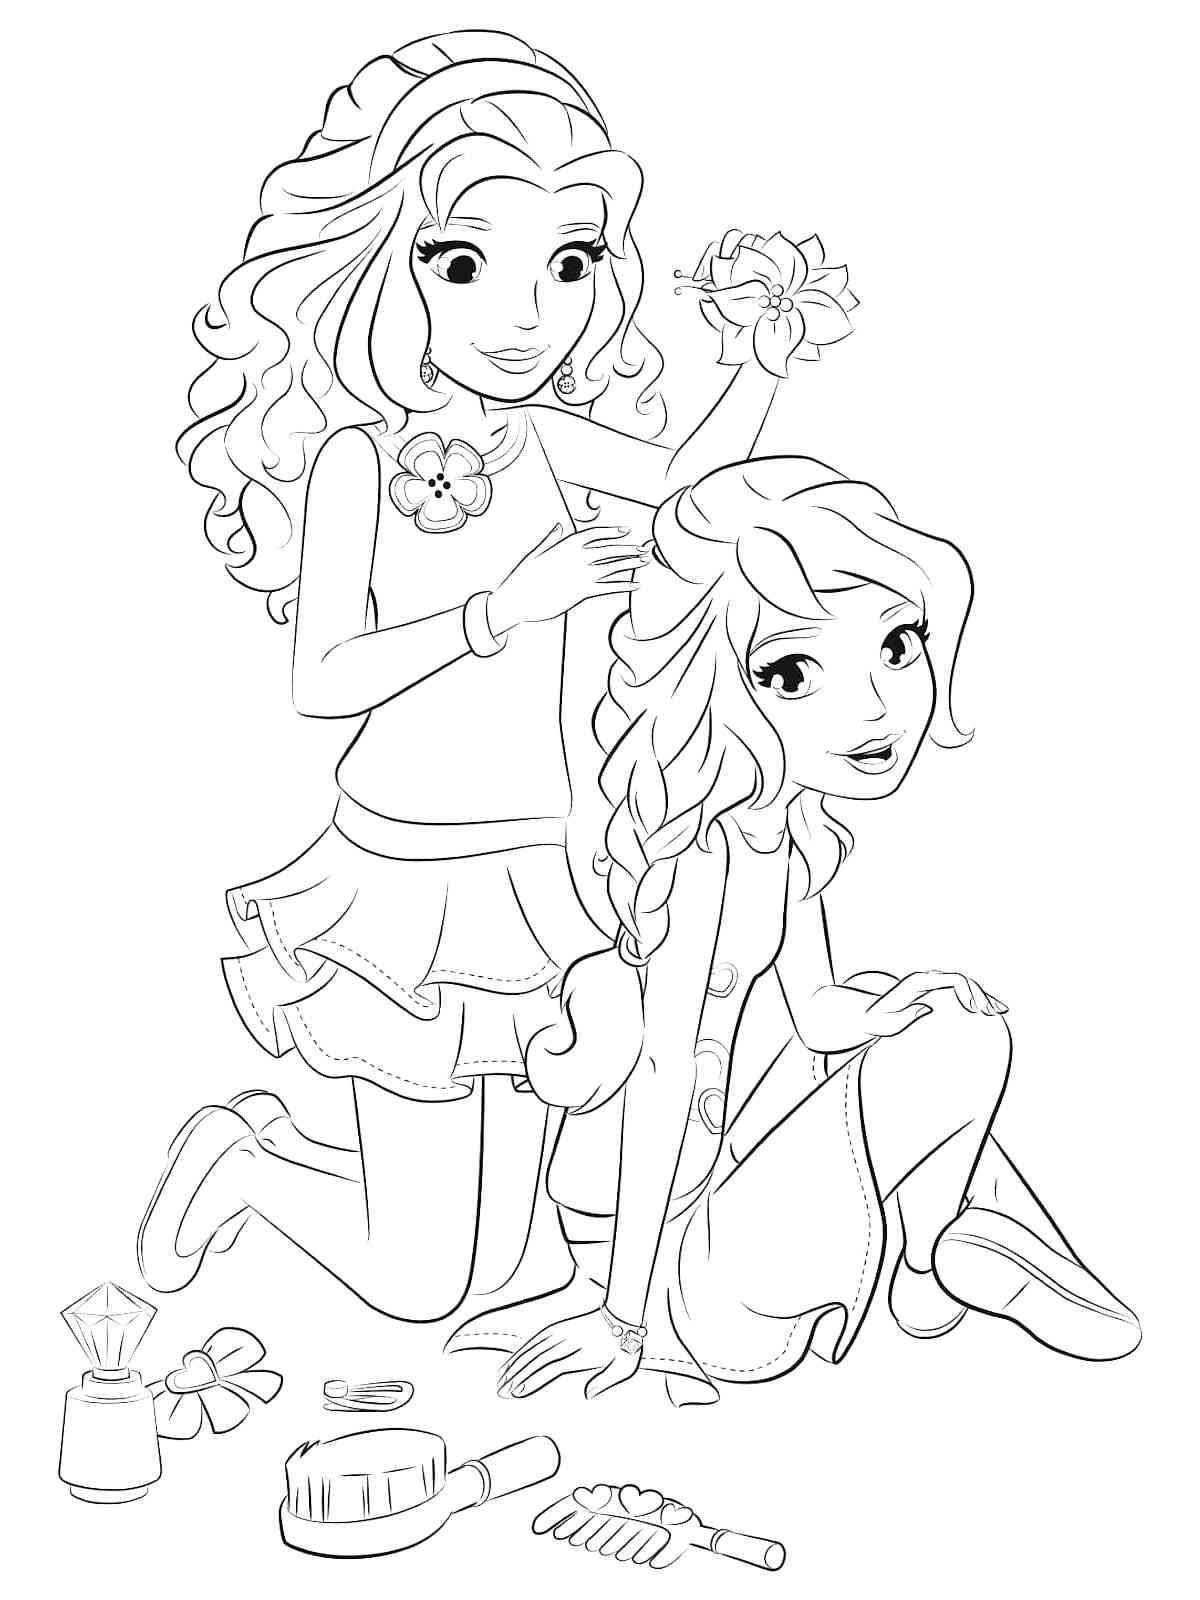 Lego Friends coloring pages. Free Printable Lego Friends coloring ...